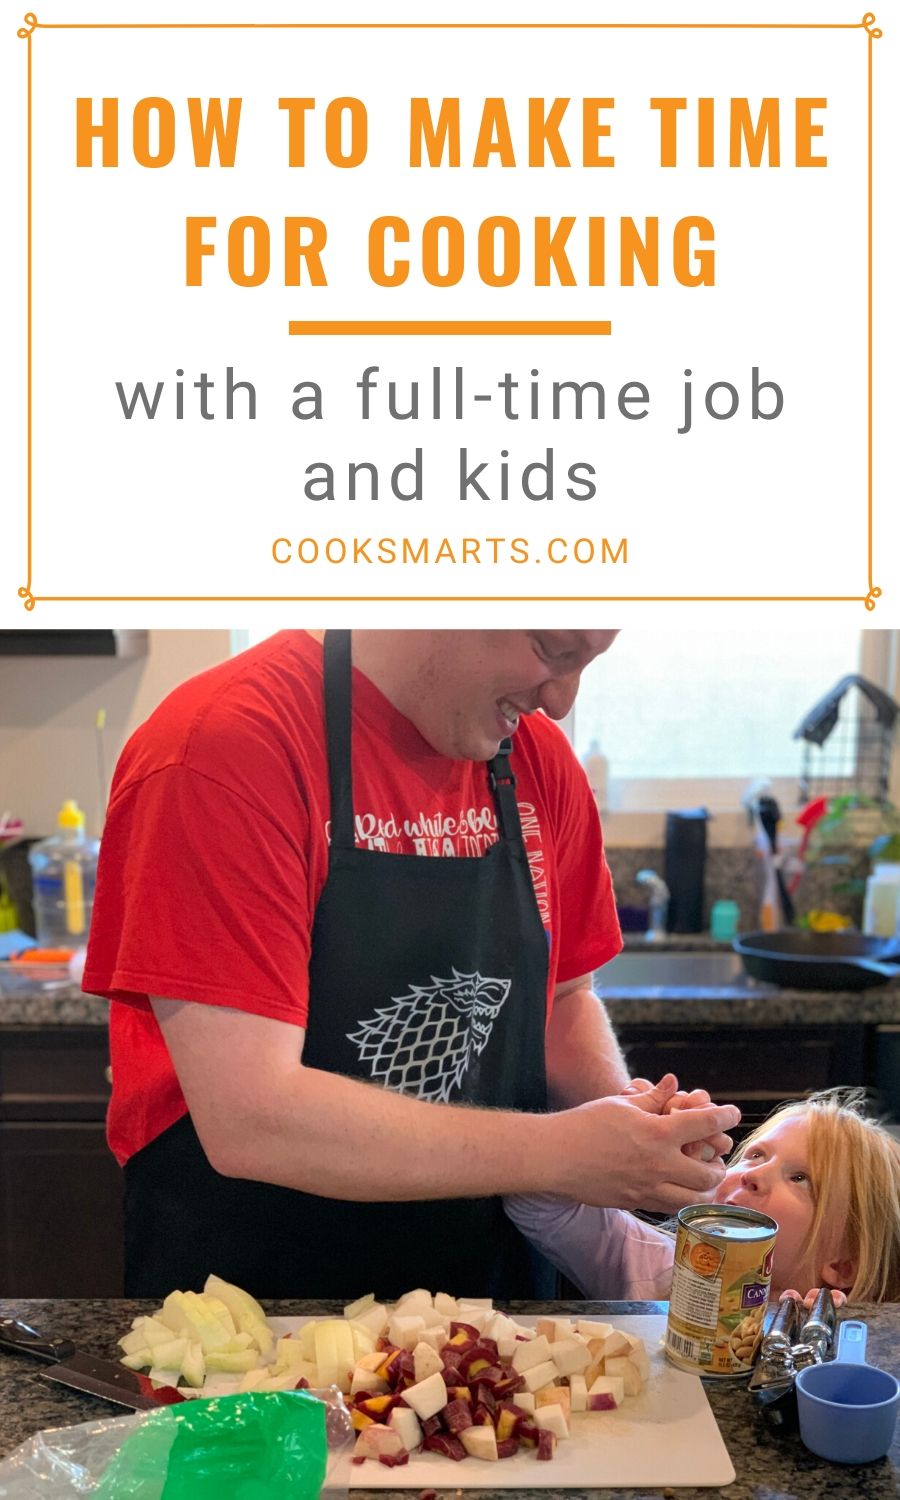 How to Make Time for Cooking with a Full-time Job and Kids | Cook Smarts